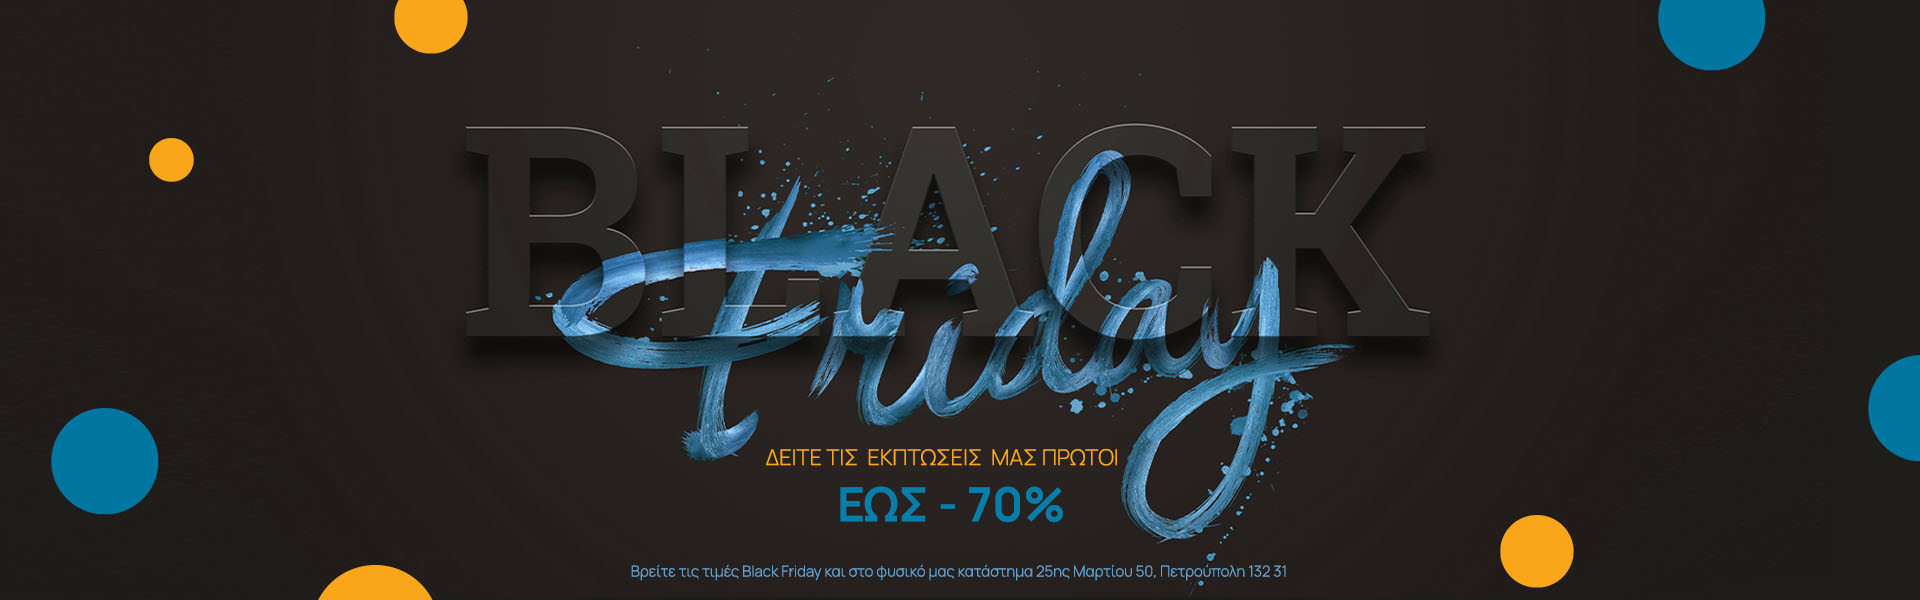 Phactory Black Friday Offers Έως -70%!